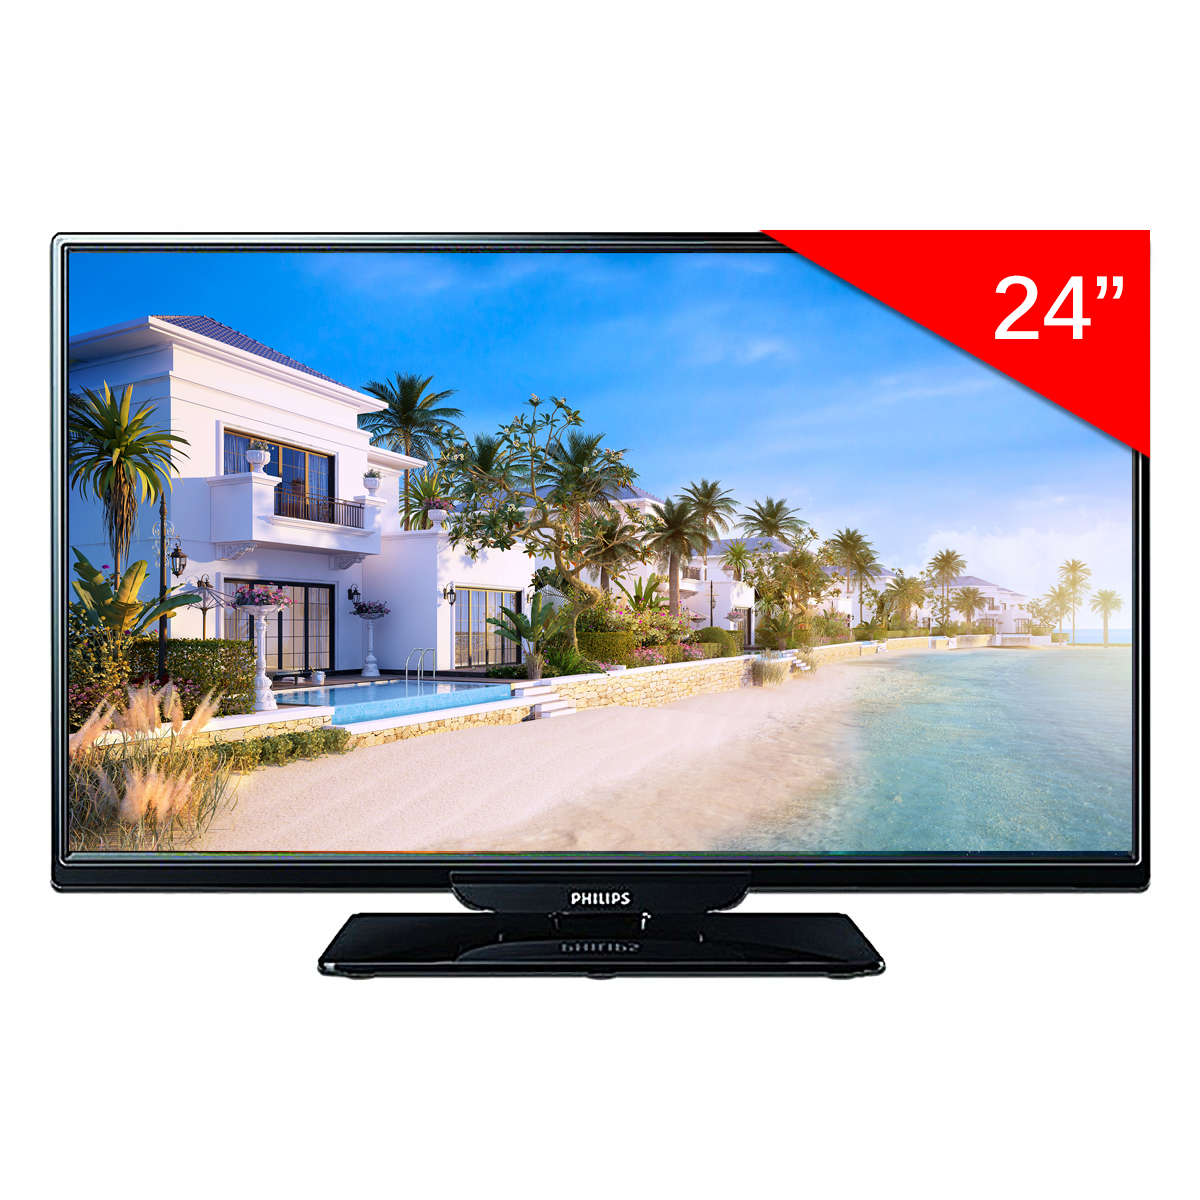 Cheap used TVs under 1 million - Old Philips 24 inch TVs